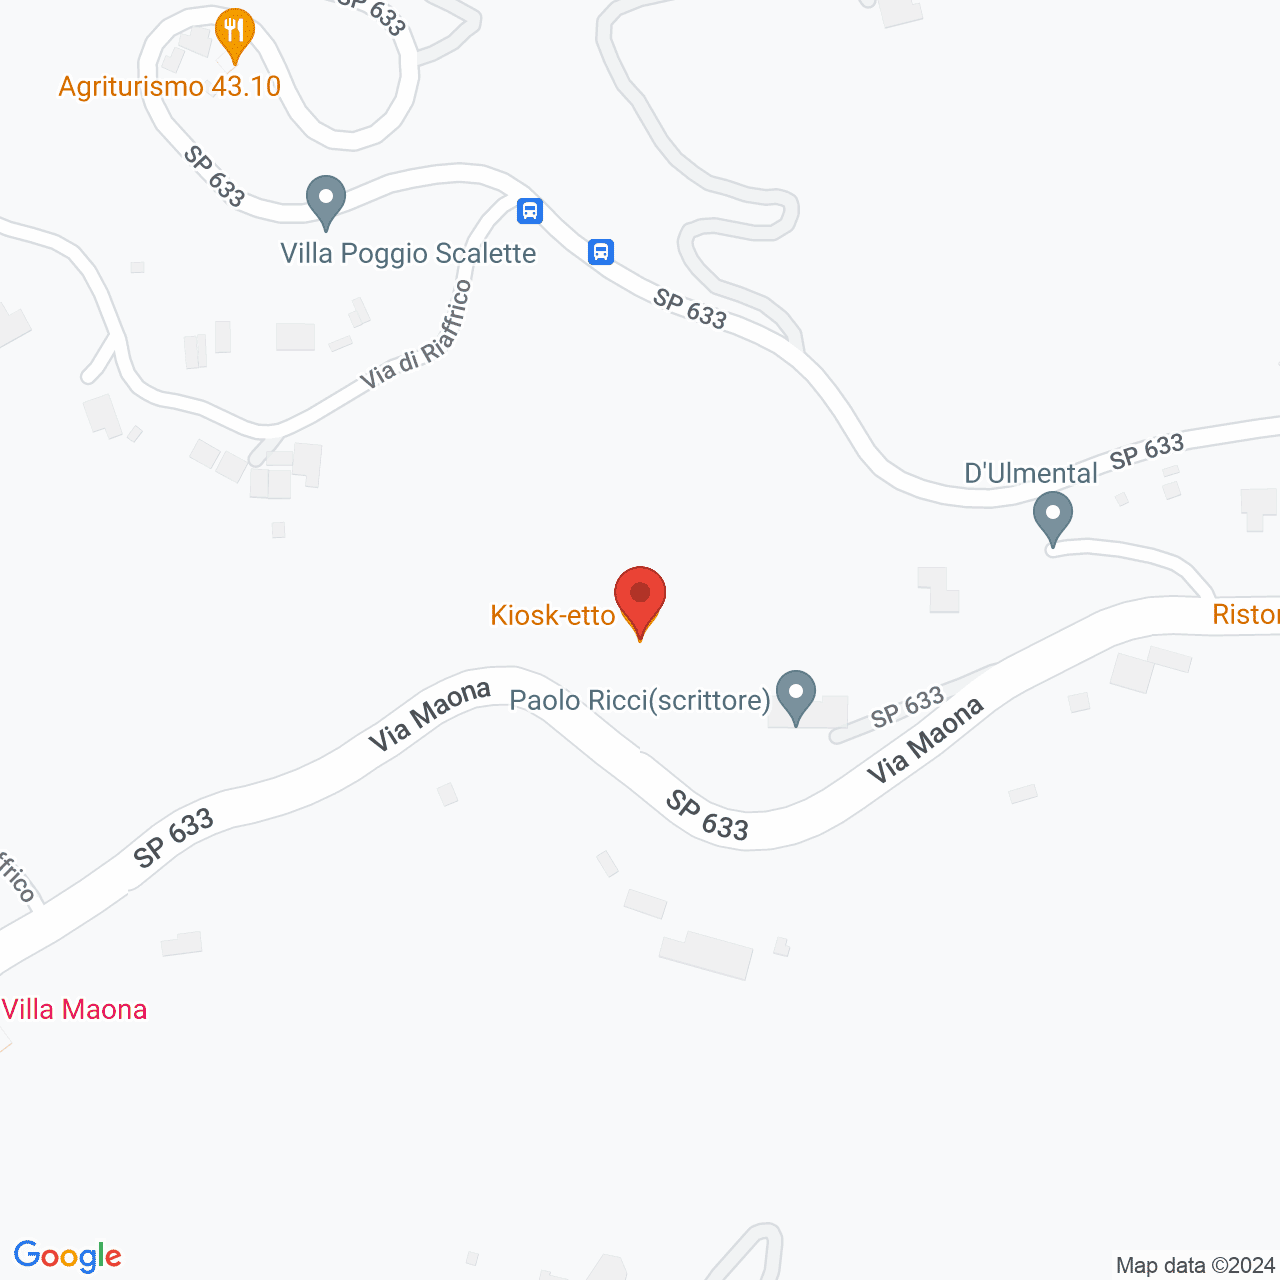 https://maps.googleapis.com/maps/api/staticmap?zoom=10&maptype=hybrid&scale=4&center=43.9033156,10.7830826&markers=color:red%7C%7C43.9033156,10.7830826&size=1000x1000&key=AIzaSyAQg6Liu52-a7wn17F9B-5c4QmJ9kTO3Mo